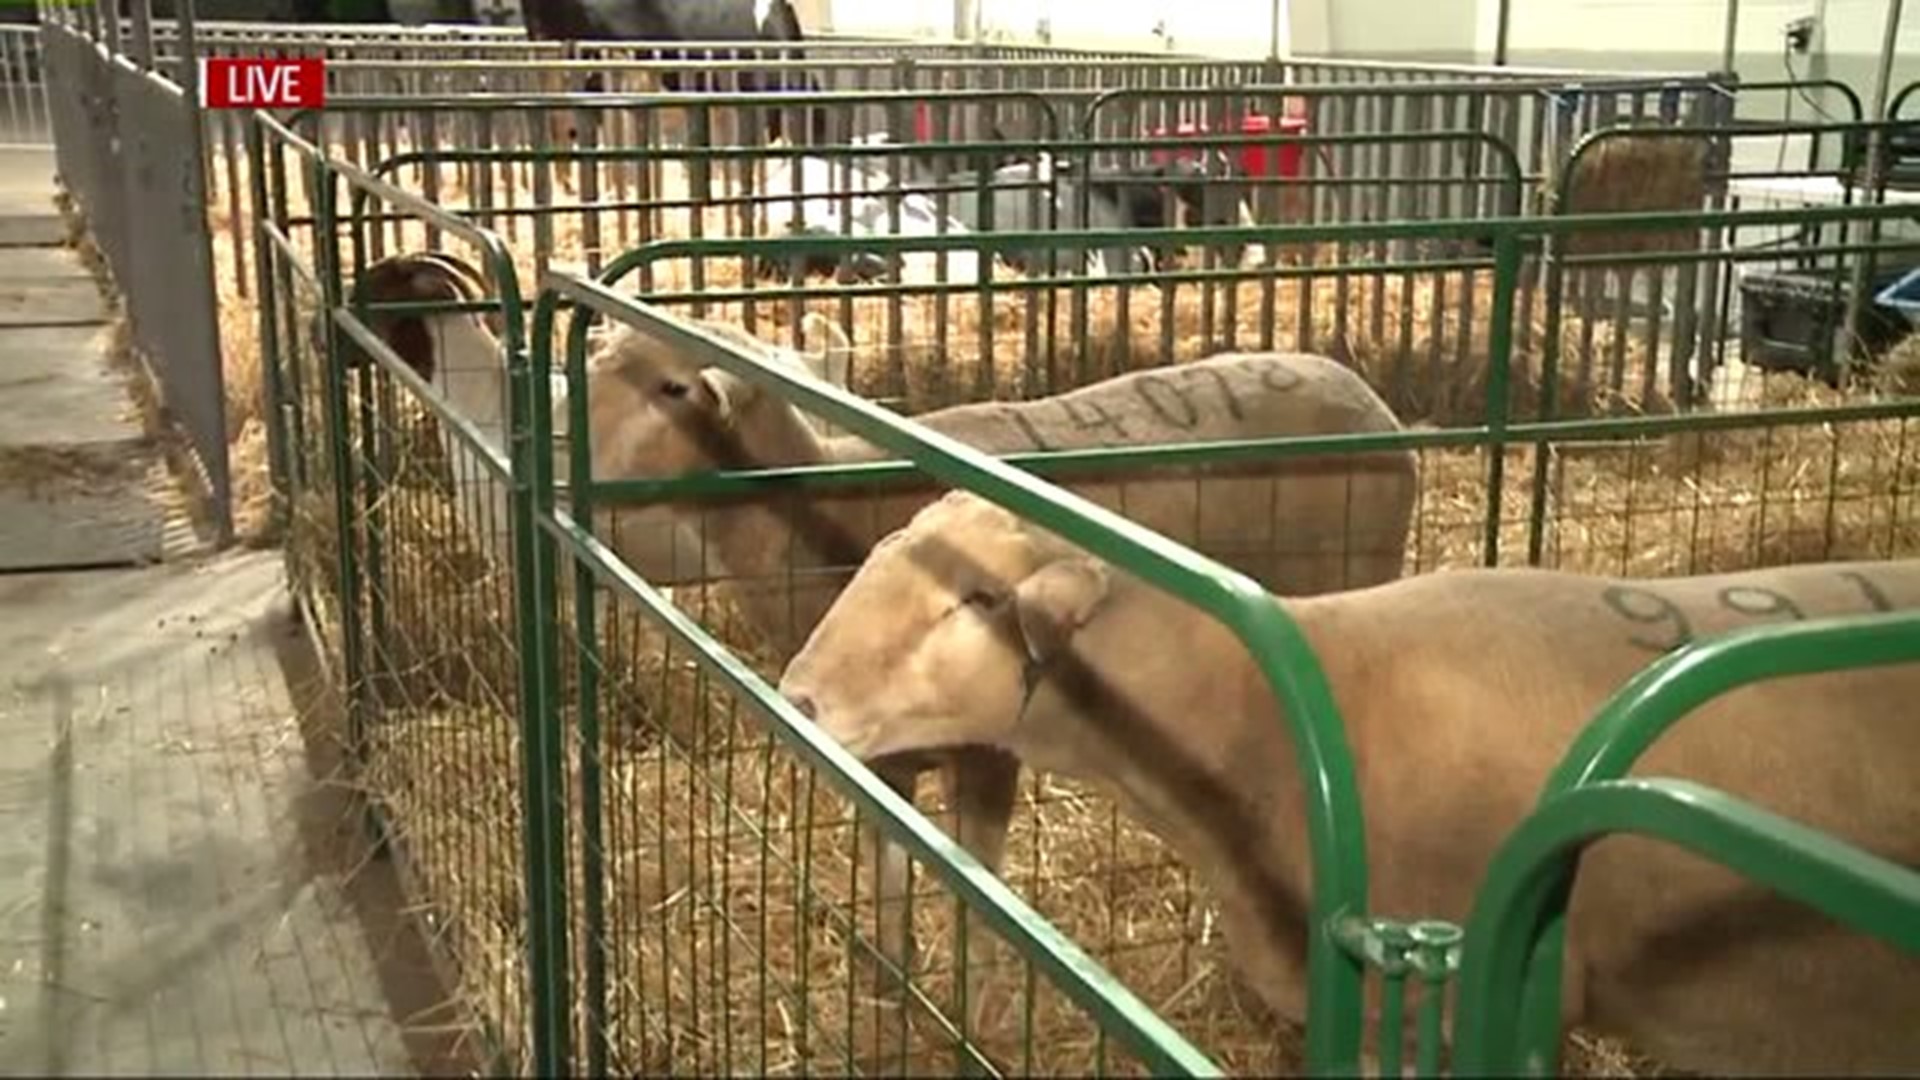 The York Fair kicks off today in West Manchester Township